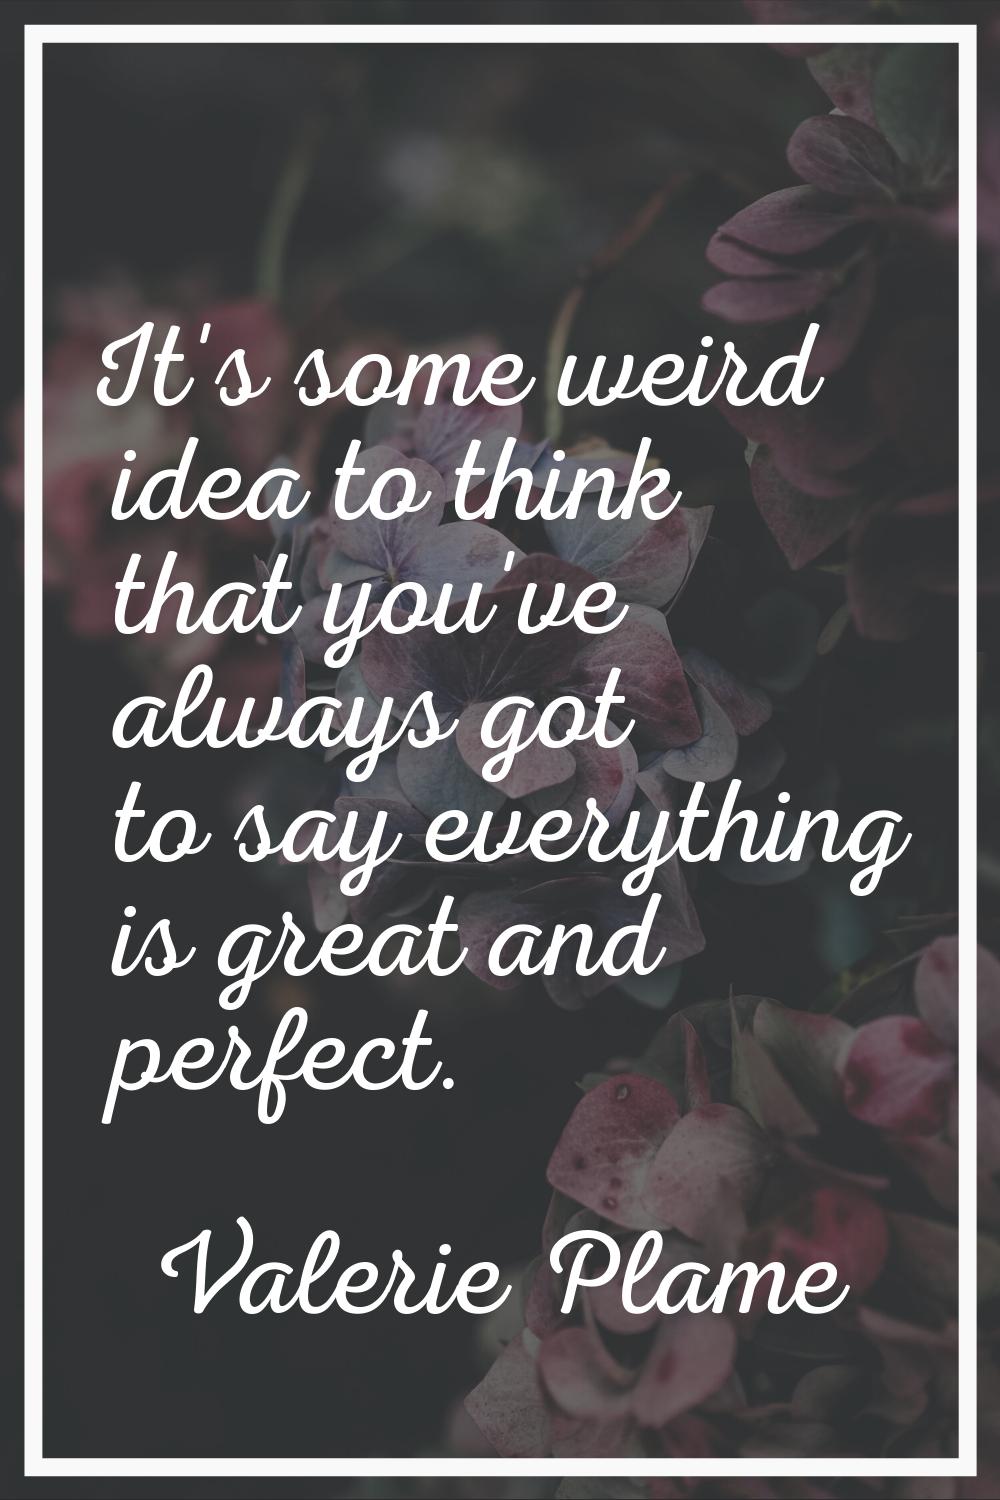 It's some weird idea to think that you've always got to say everything is great and perfect.